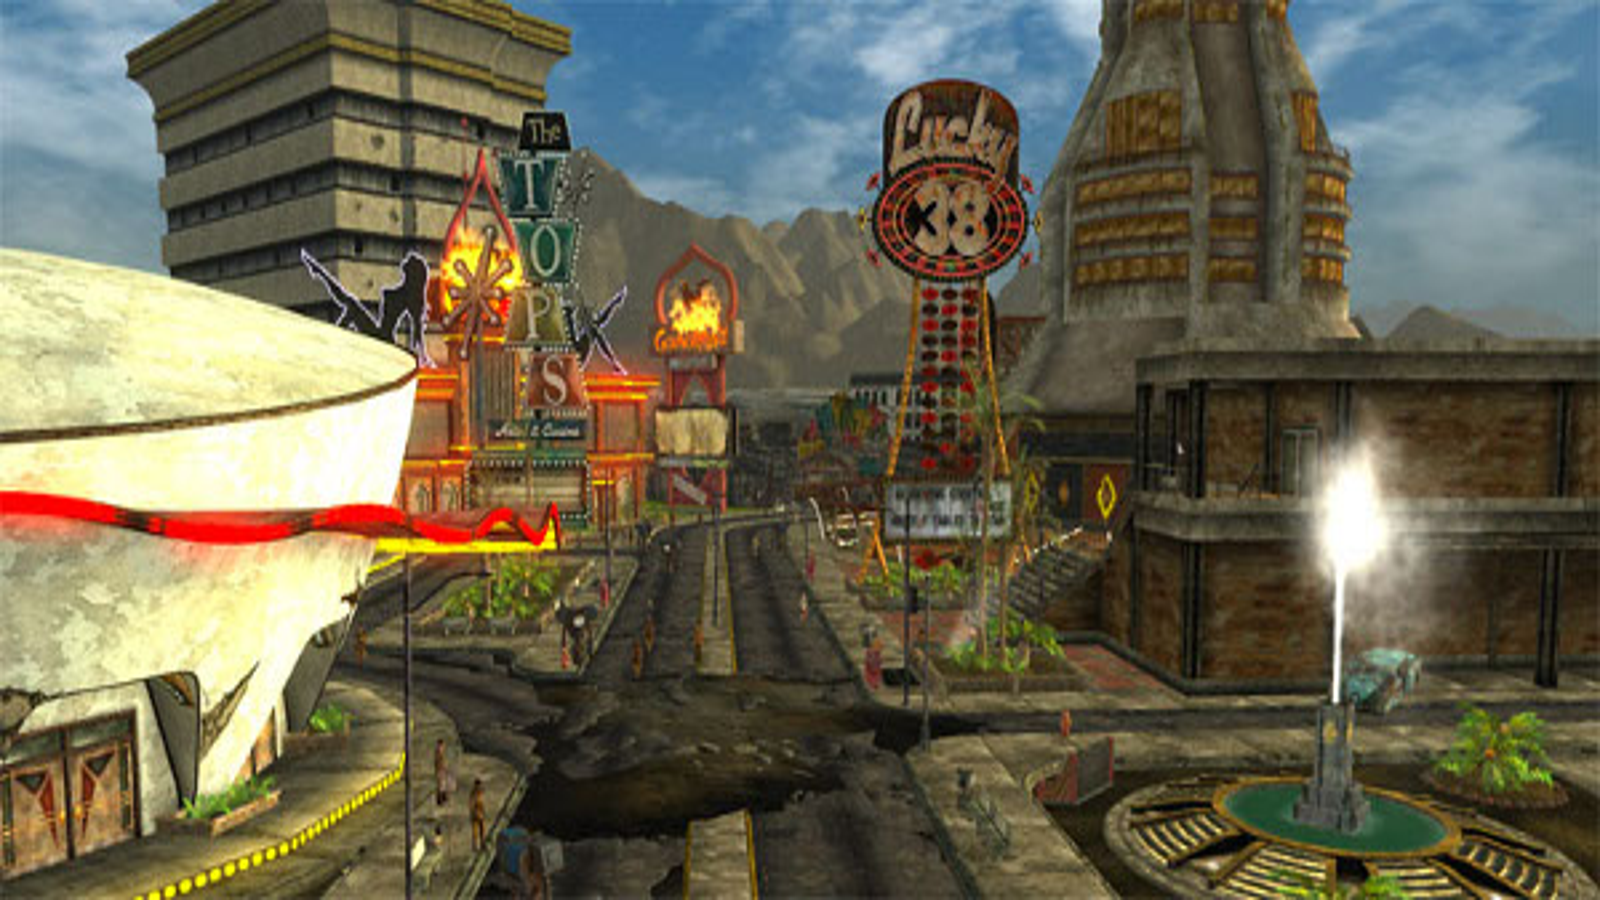 18 Best Fallout New Vegas Mods and How to Install Them